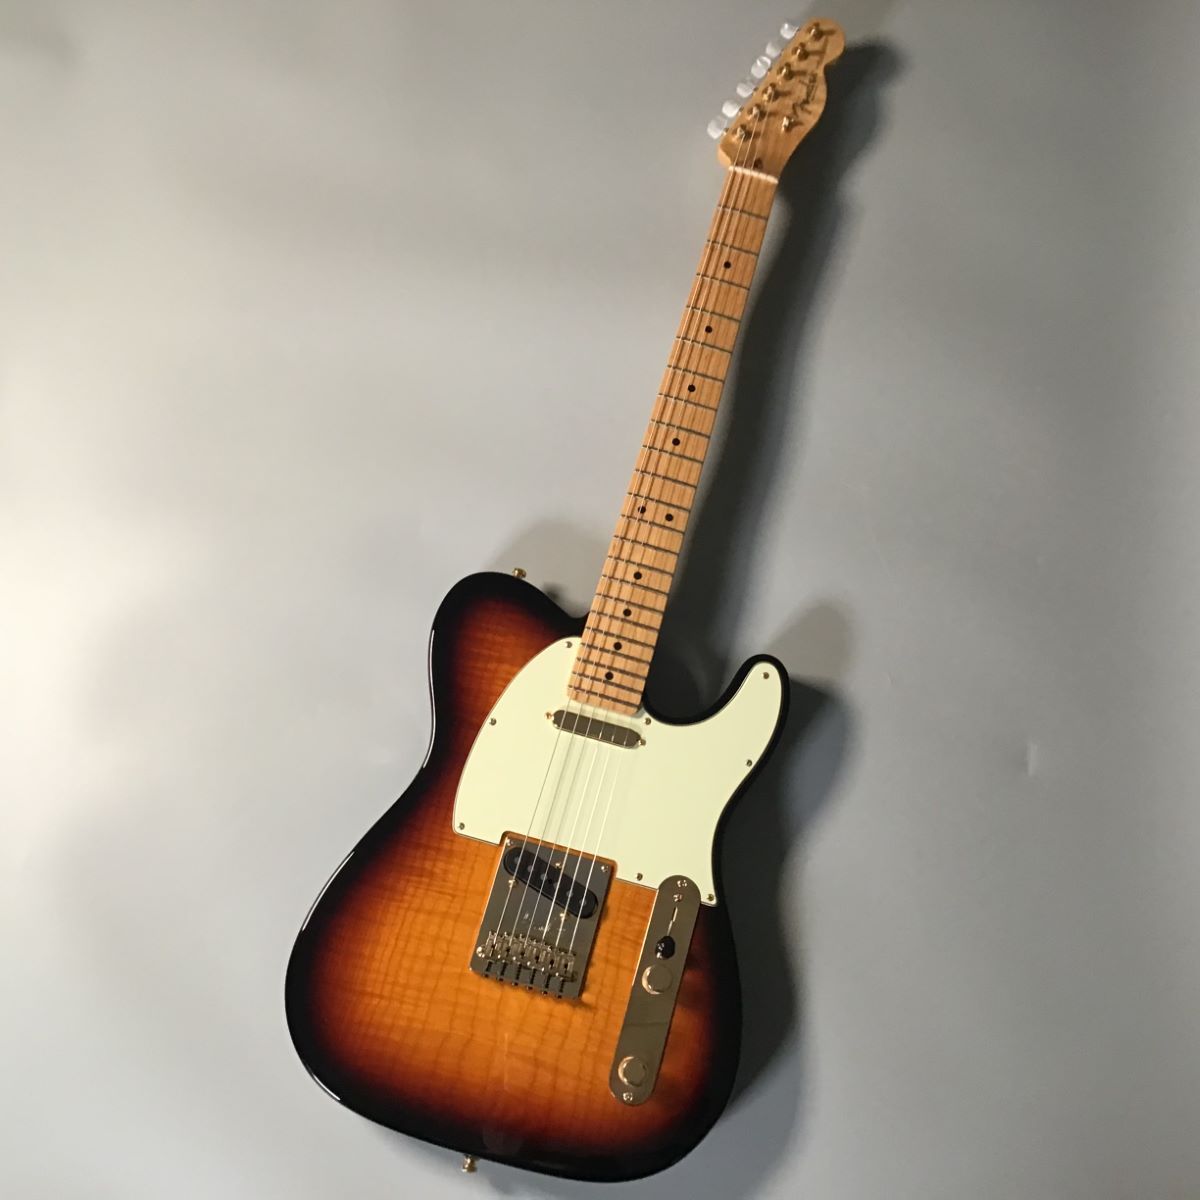 Fender Limited 60th Anniversary Tele-bration Series Fleme Top 